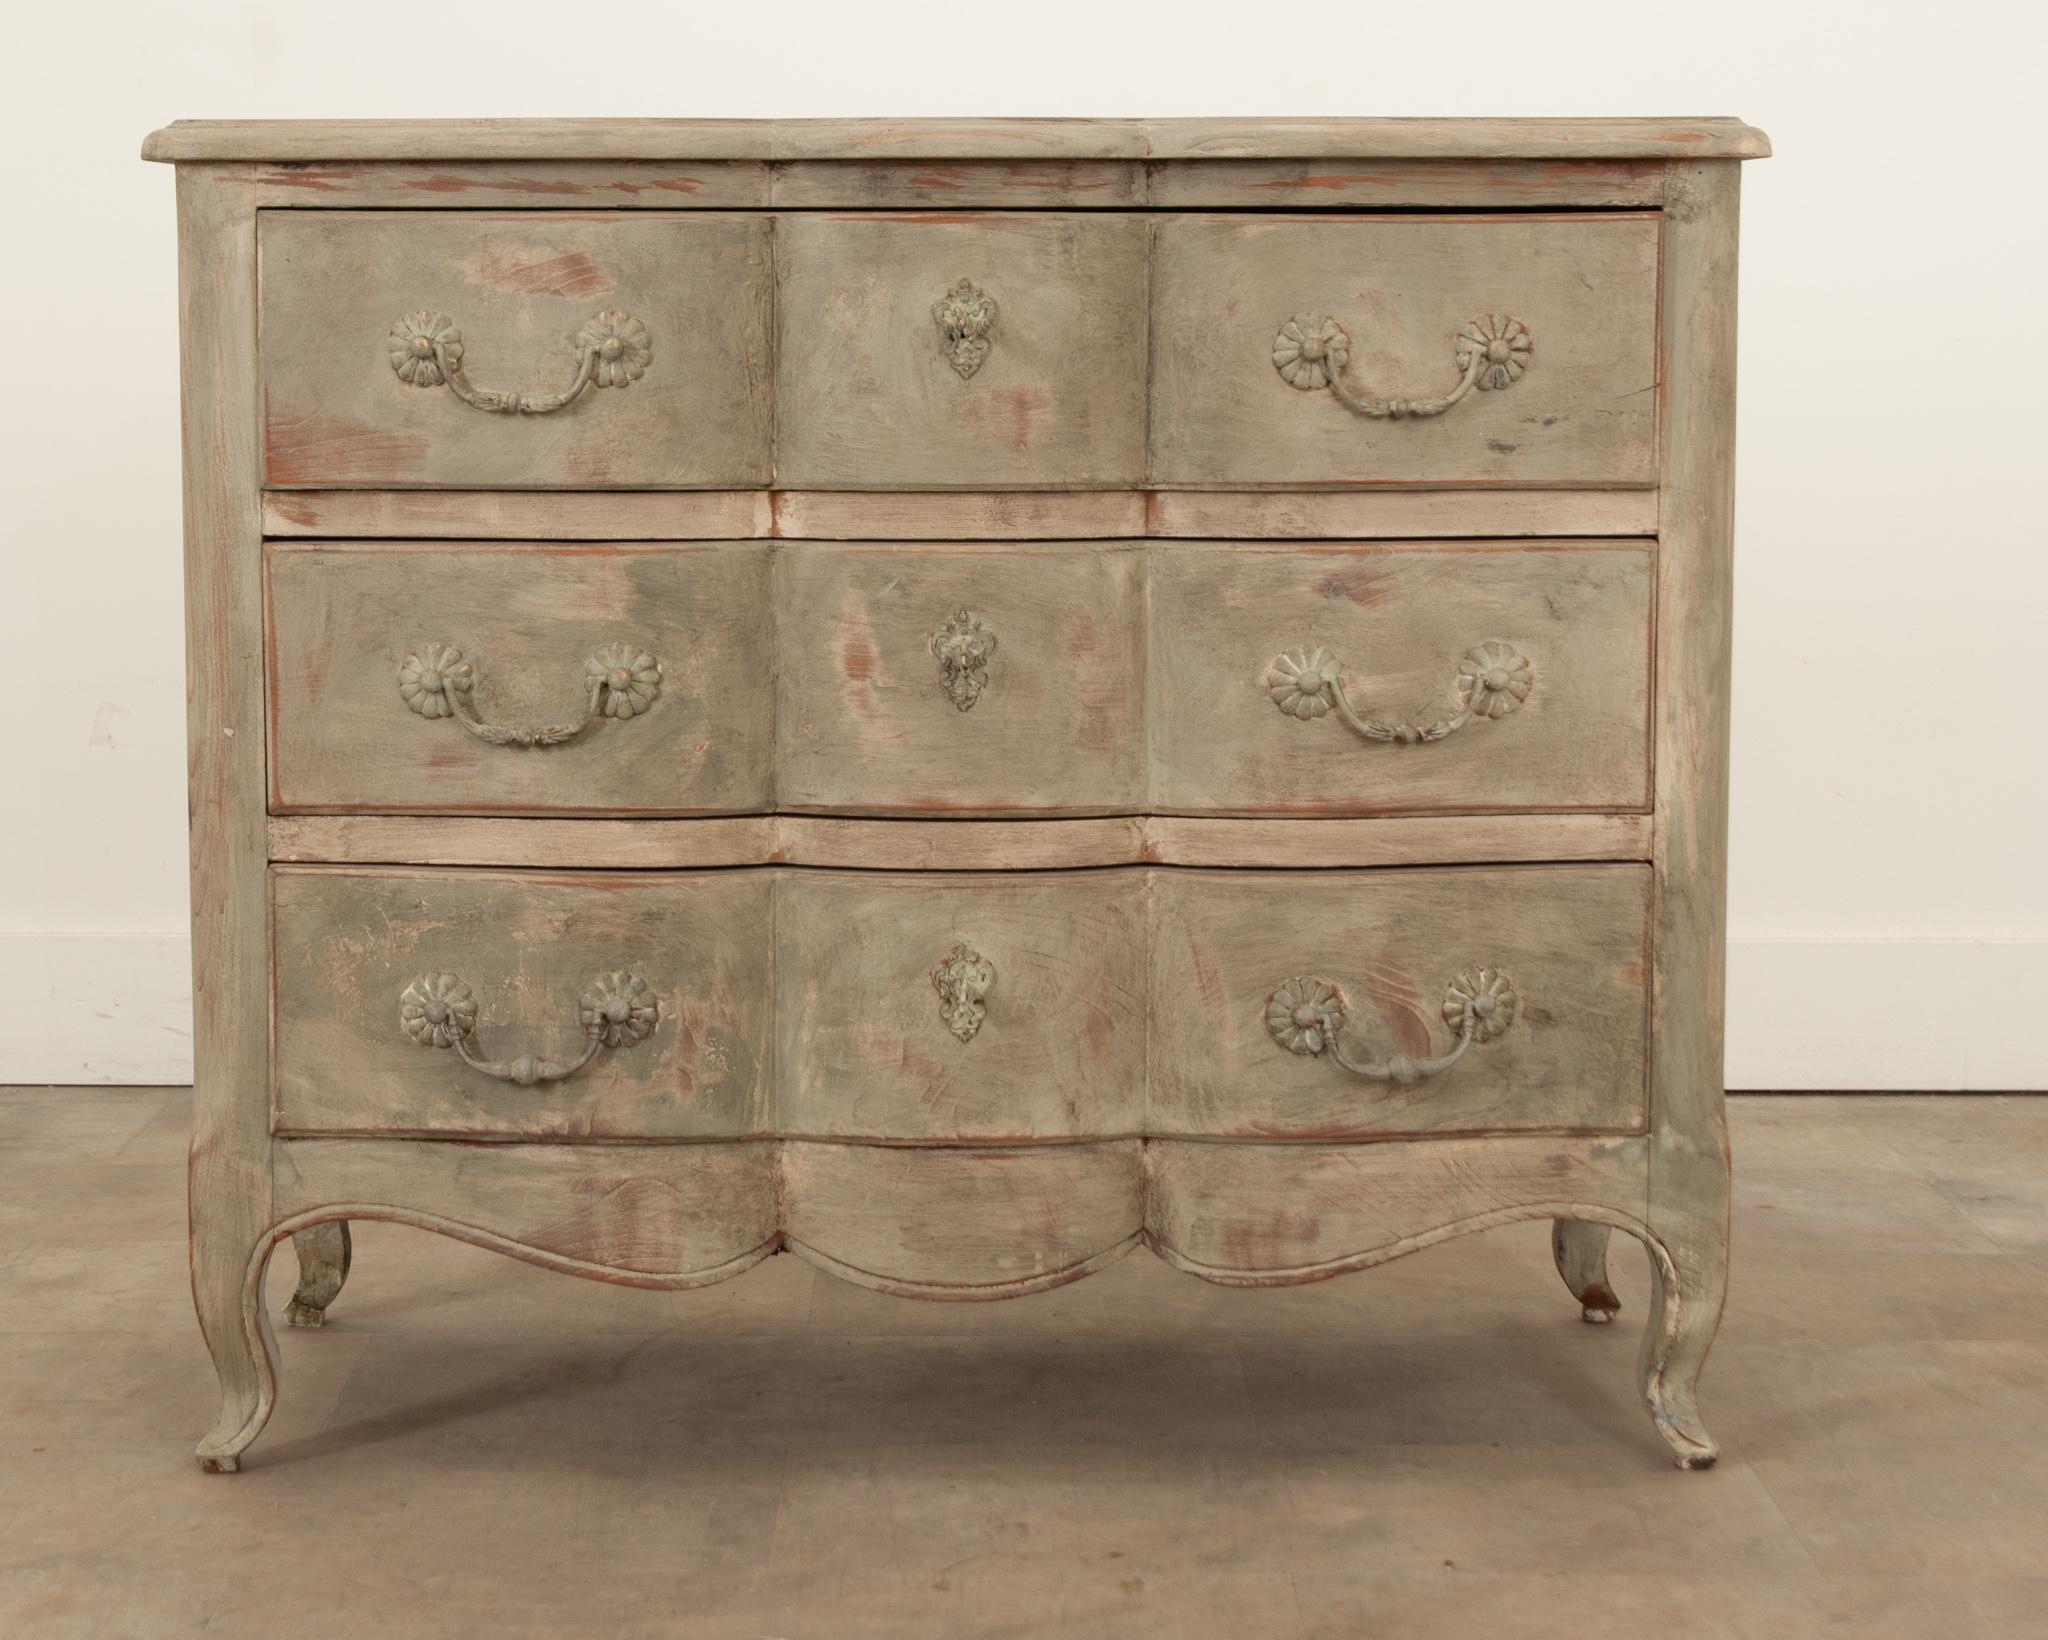 A fabulous shaped skirt and cabriole legs make this 20th century French stripped and painted commode a standout. This recently painted case piece incorporates elements of both Louis XV and Regence styles. The shaped top with a curvy molded edge is